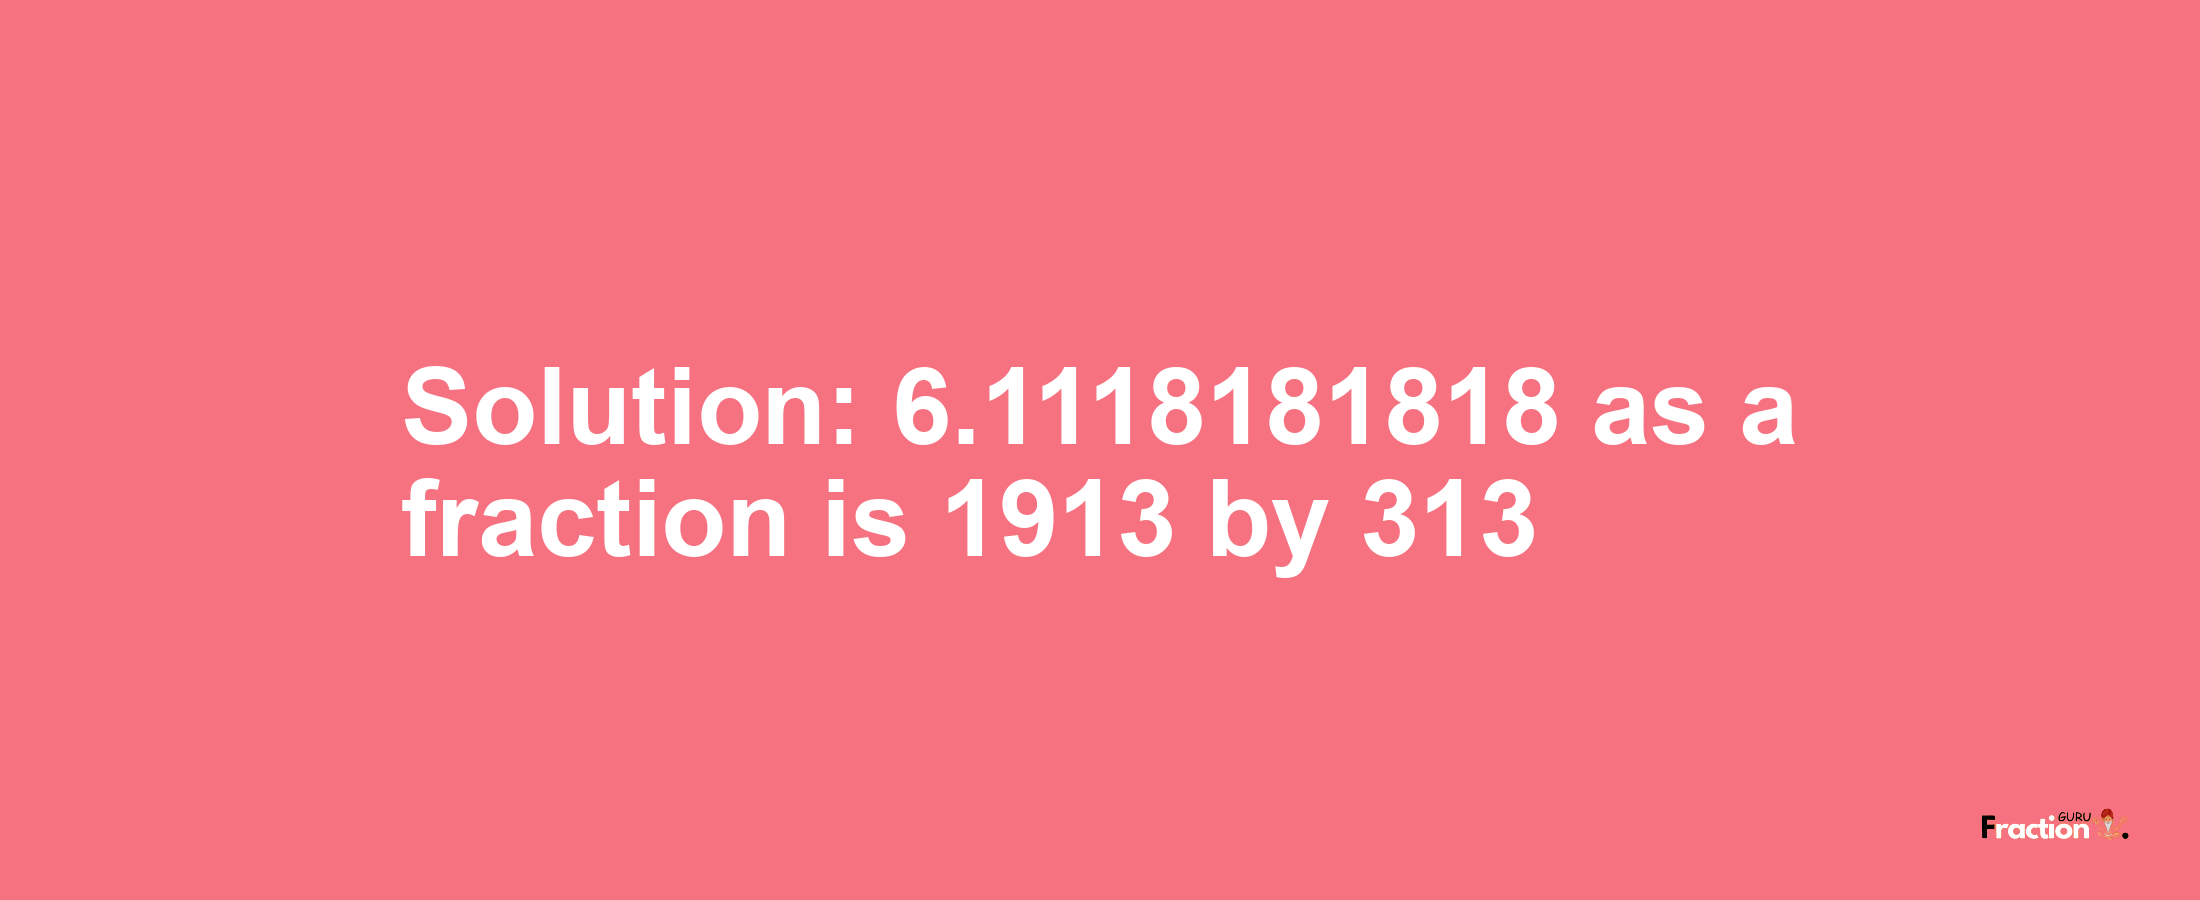 Solution:6.1118181818 as a fraction is 1913/313